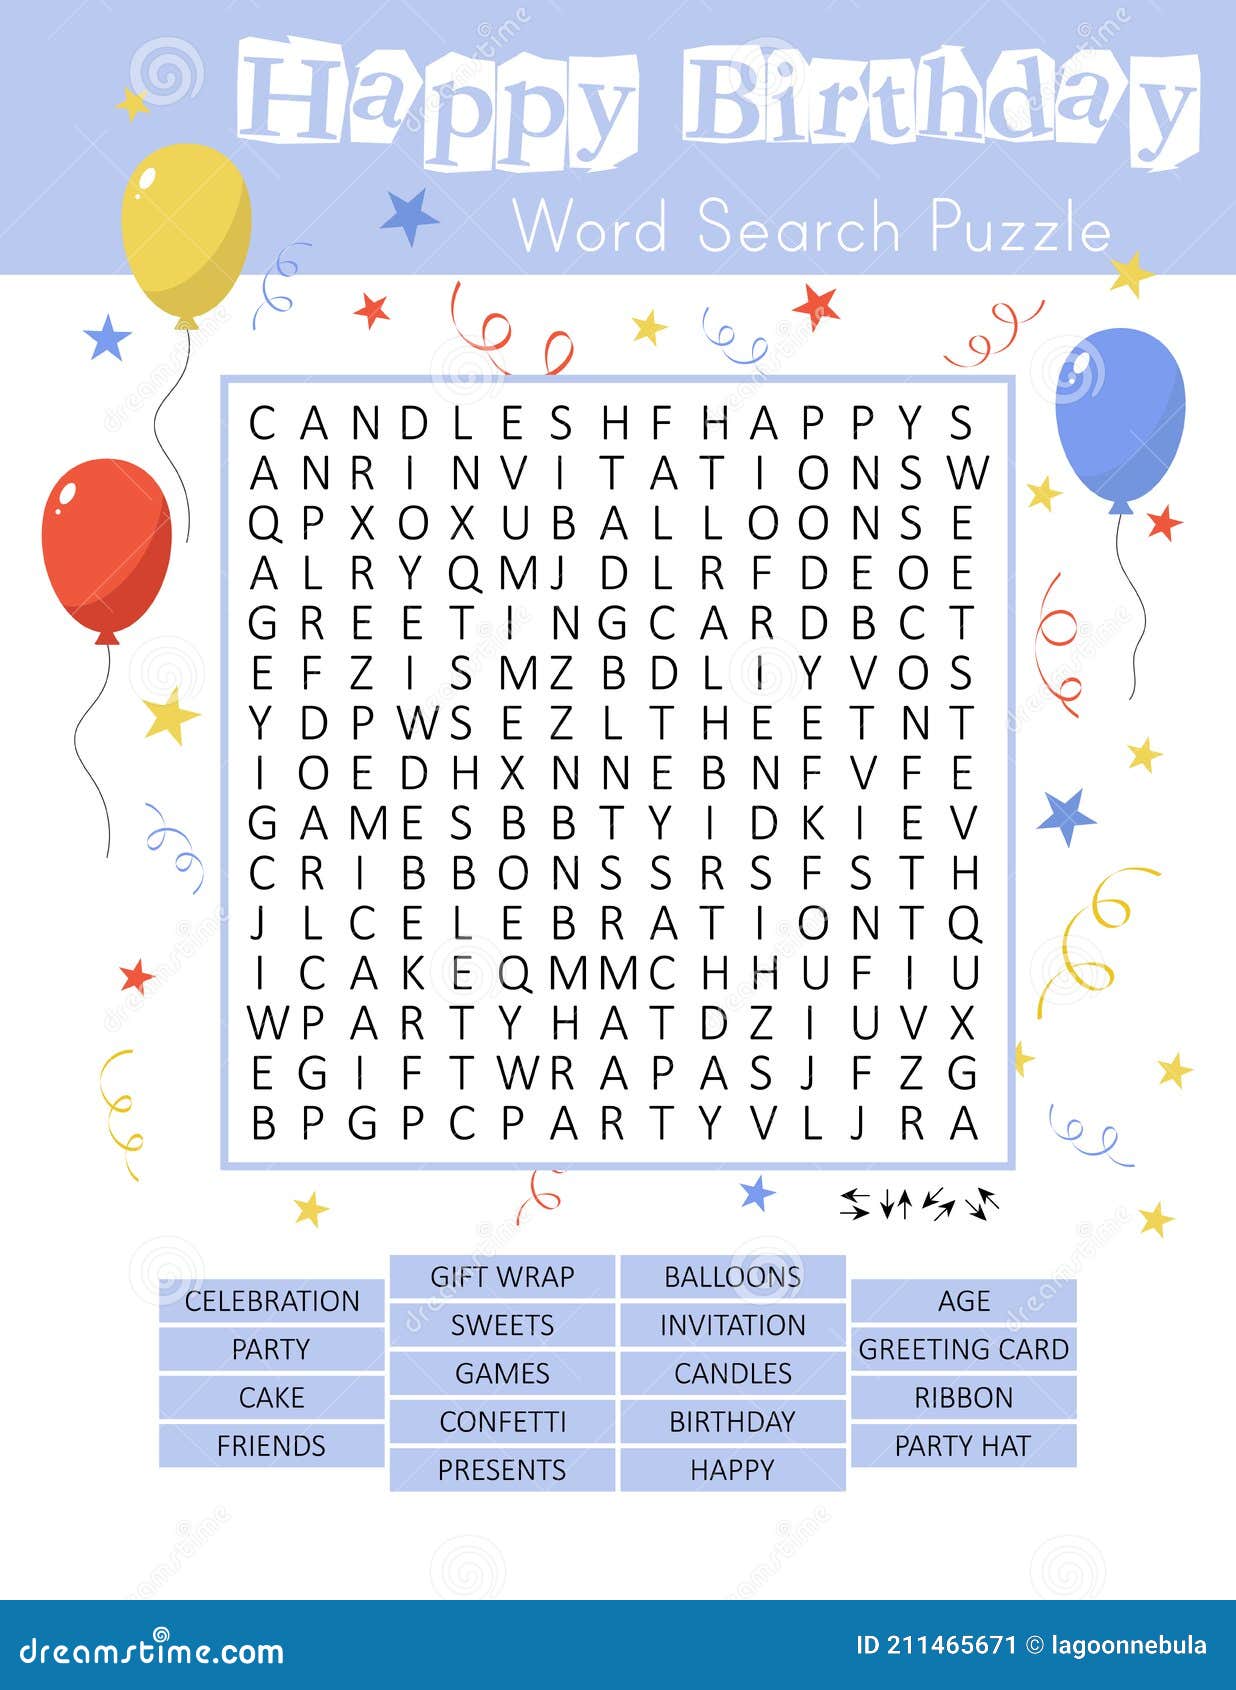 Happy Birthday Word Search Puzzle. Educational Game for Kids. Crossword ...